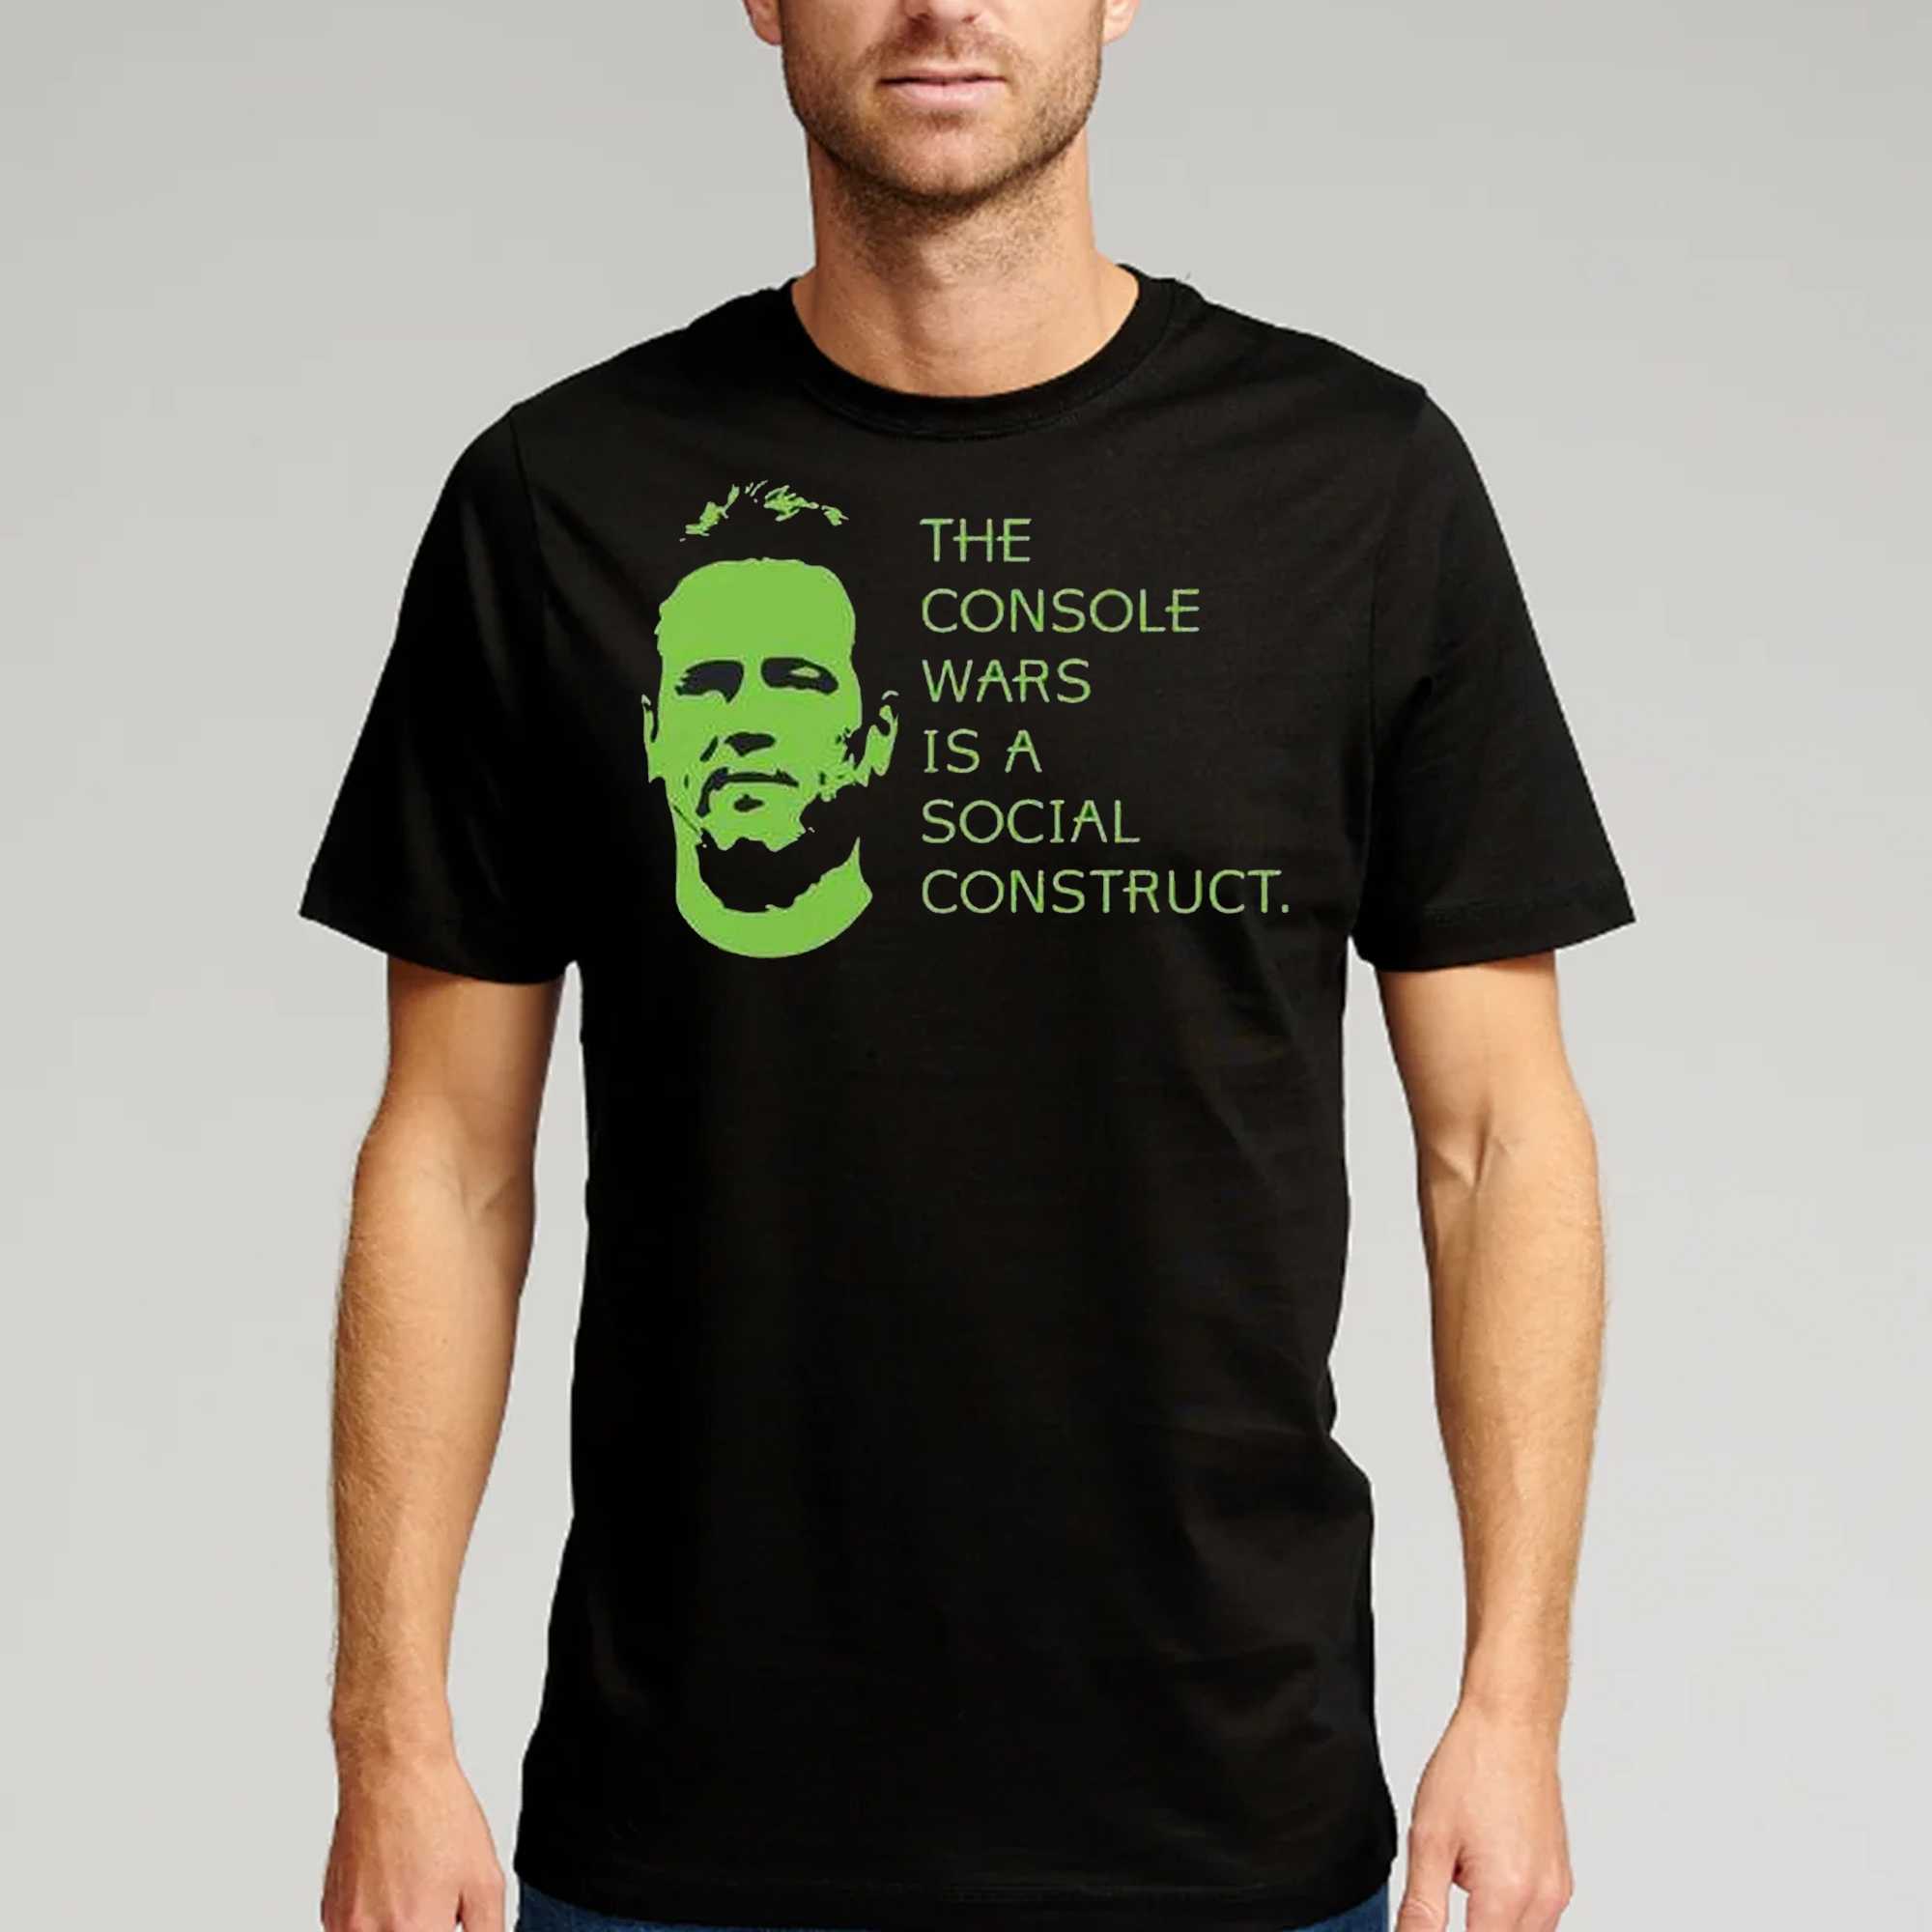 the-console-wars-is-a-social-construct-shirt-1.jpg